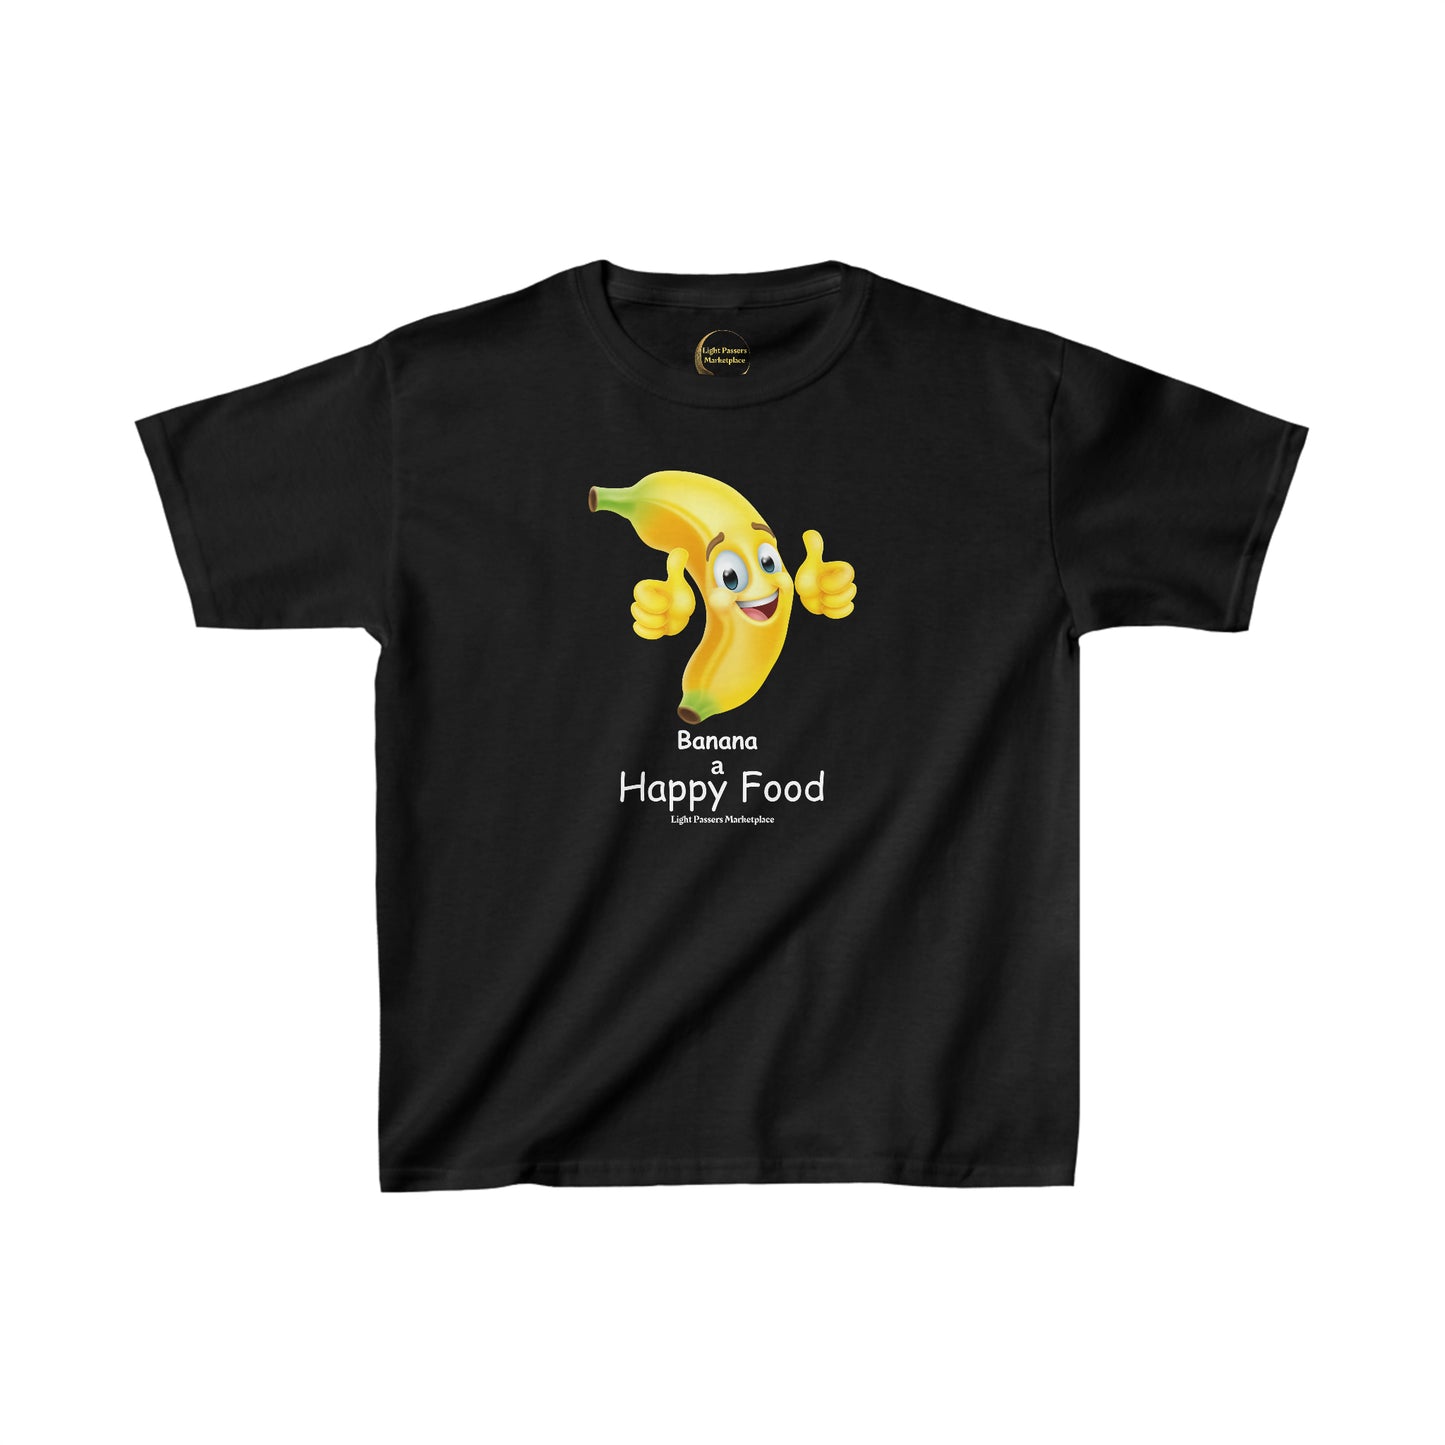 Light Passers Marketplace Youth Cotton T-shirt Nutrition, Mental Health